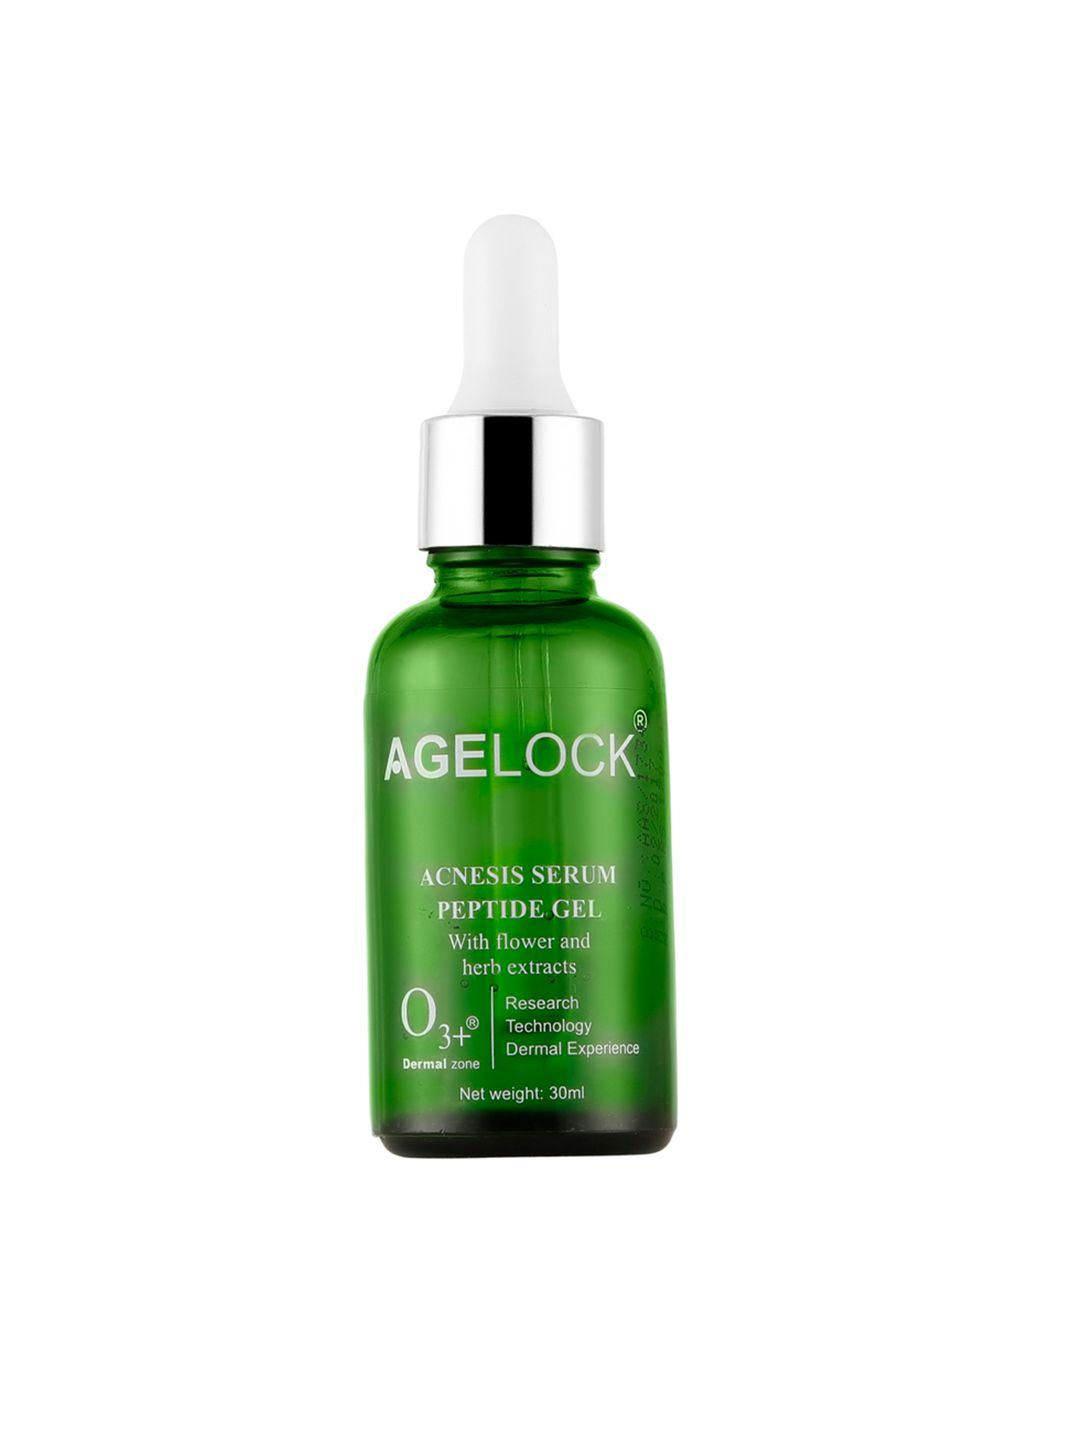 o3 agelock acnesis serum peptide gel with flowers & herb extract - 30 ml